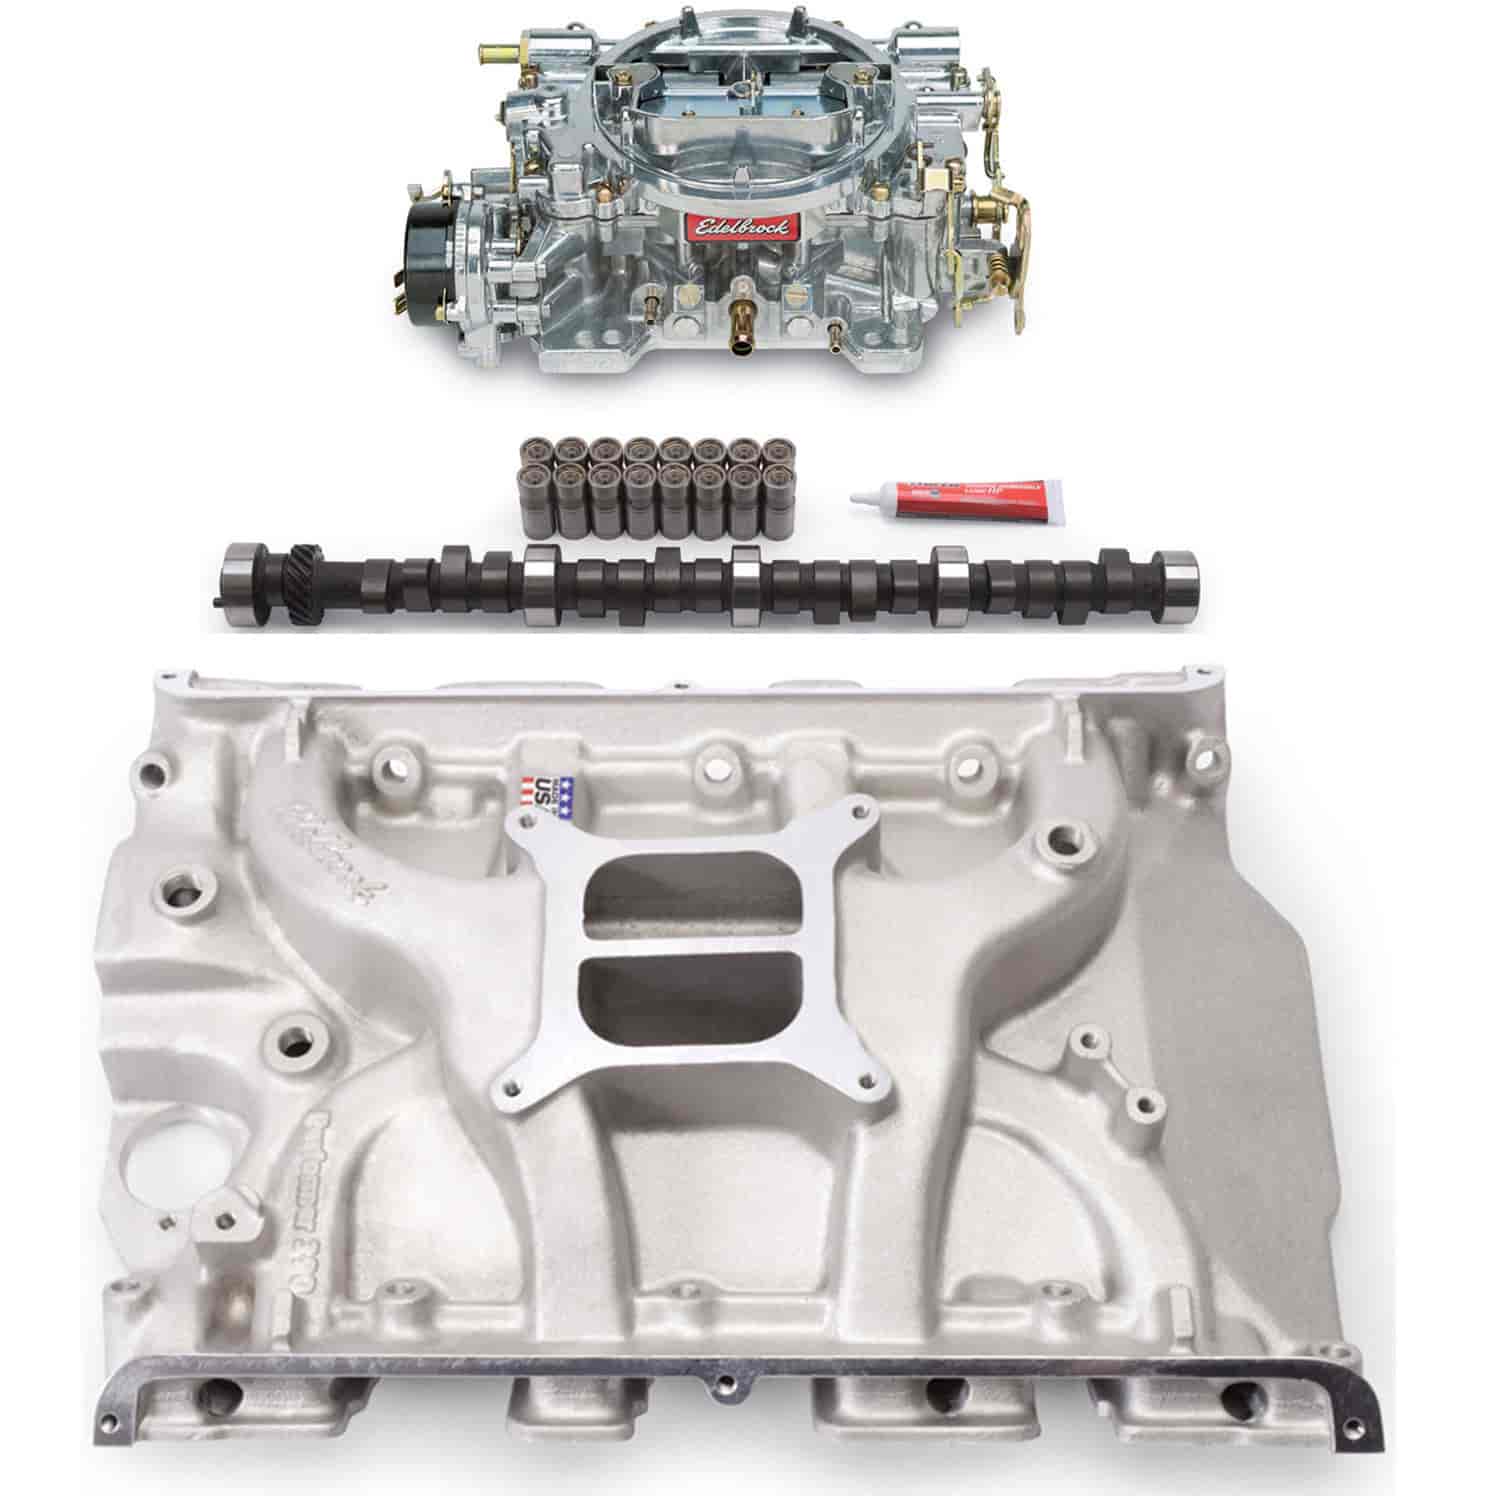 Ford FE 332-428ci Performer Power Package